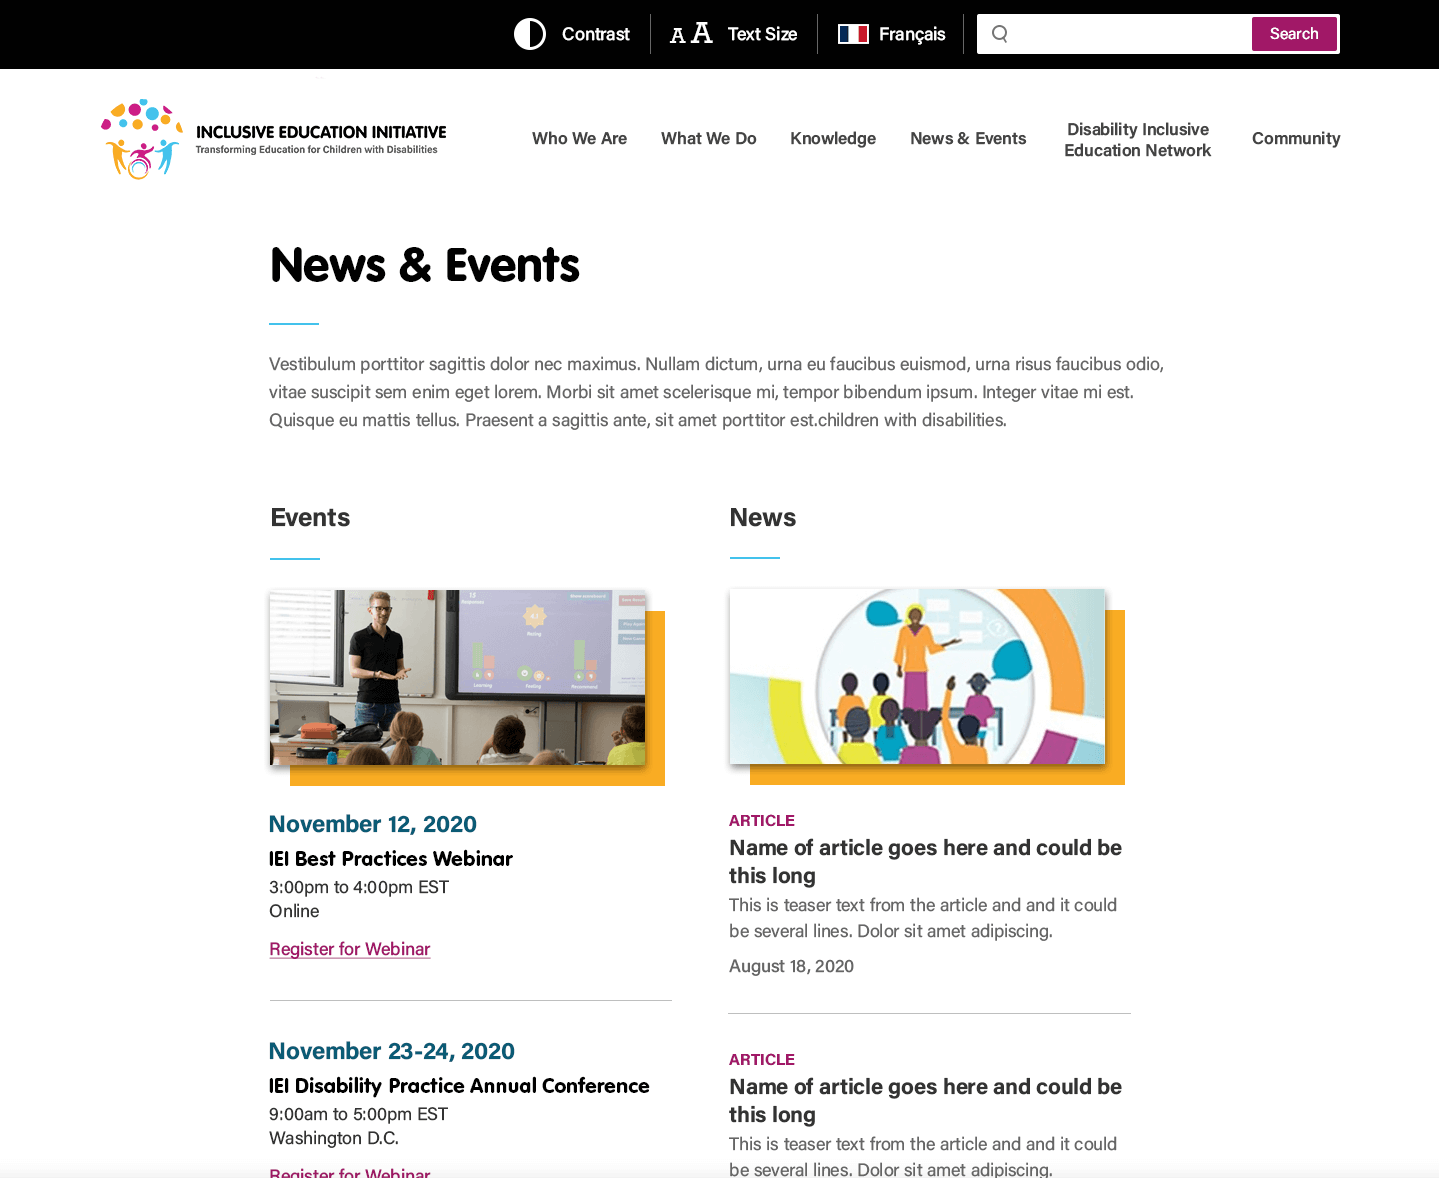 A news and events landing page on the new IEI website